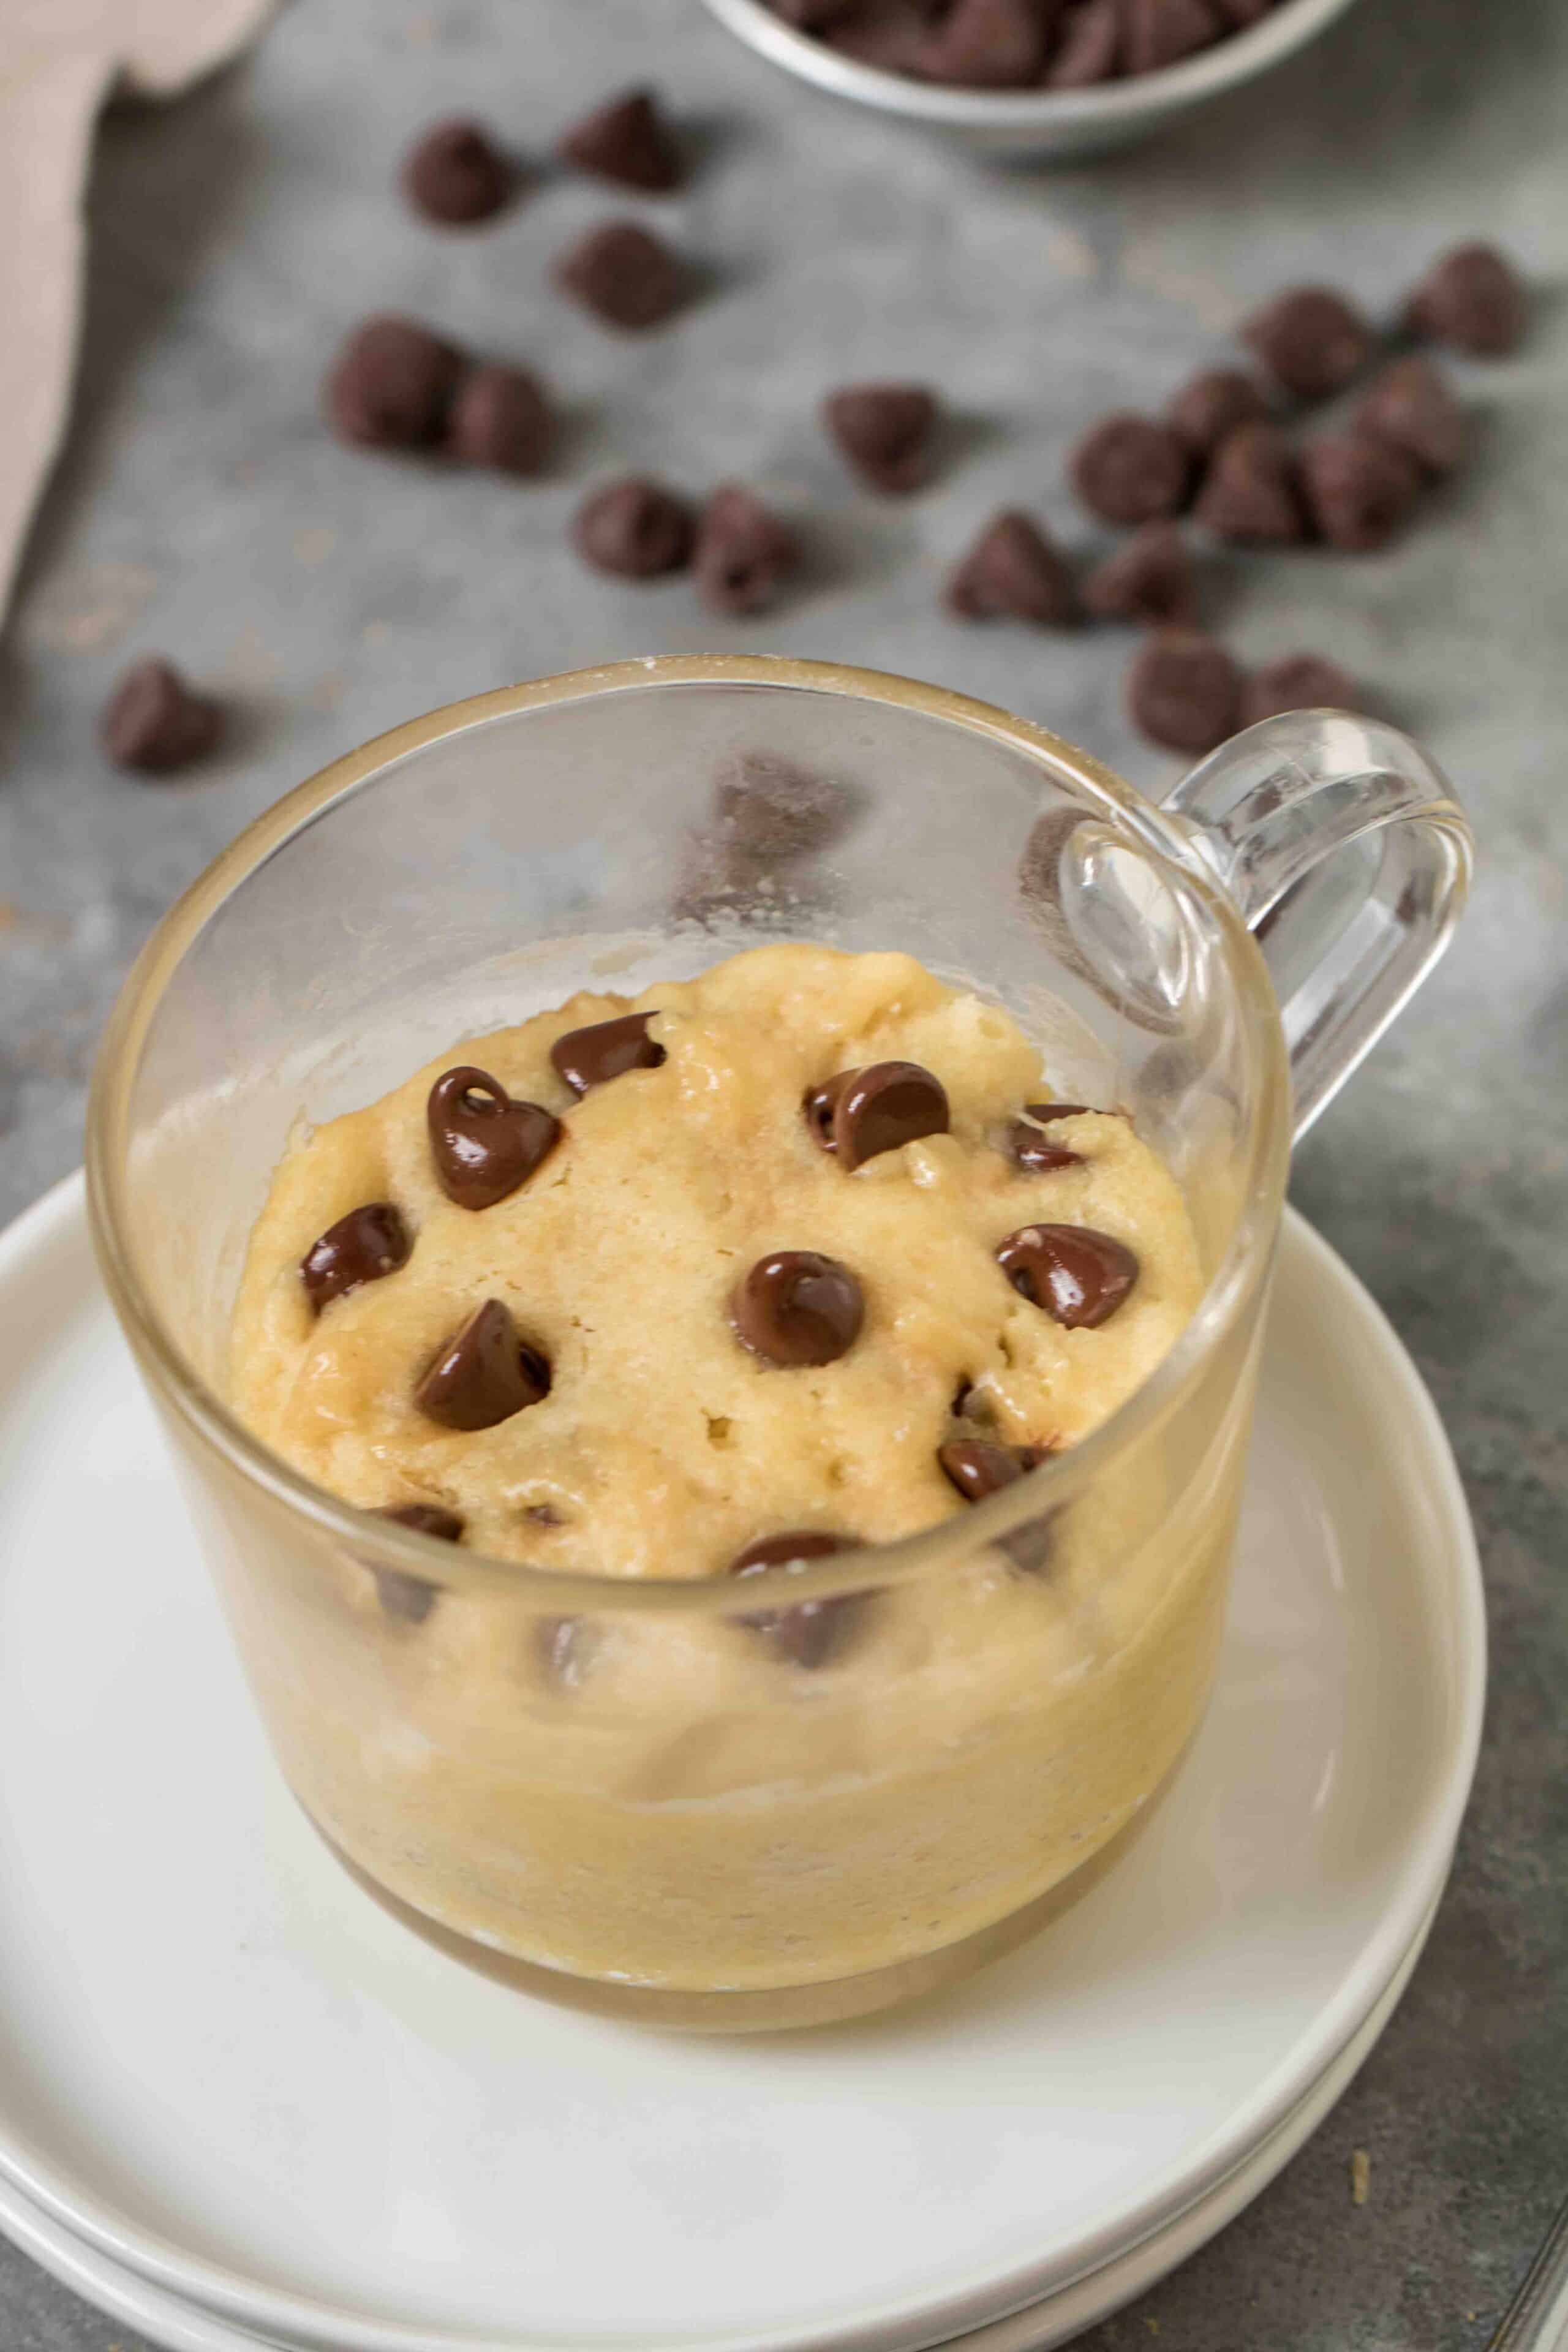 Microwave chocolate chip cookie for one topped with chocolate chips